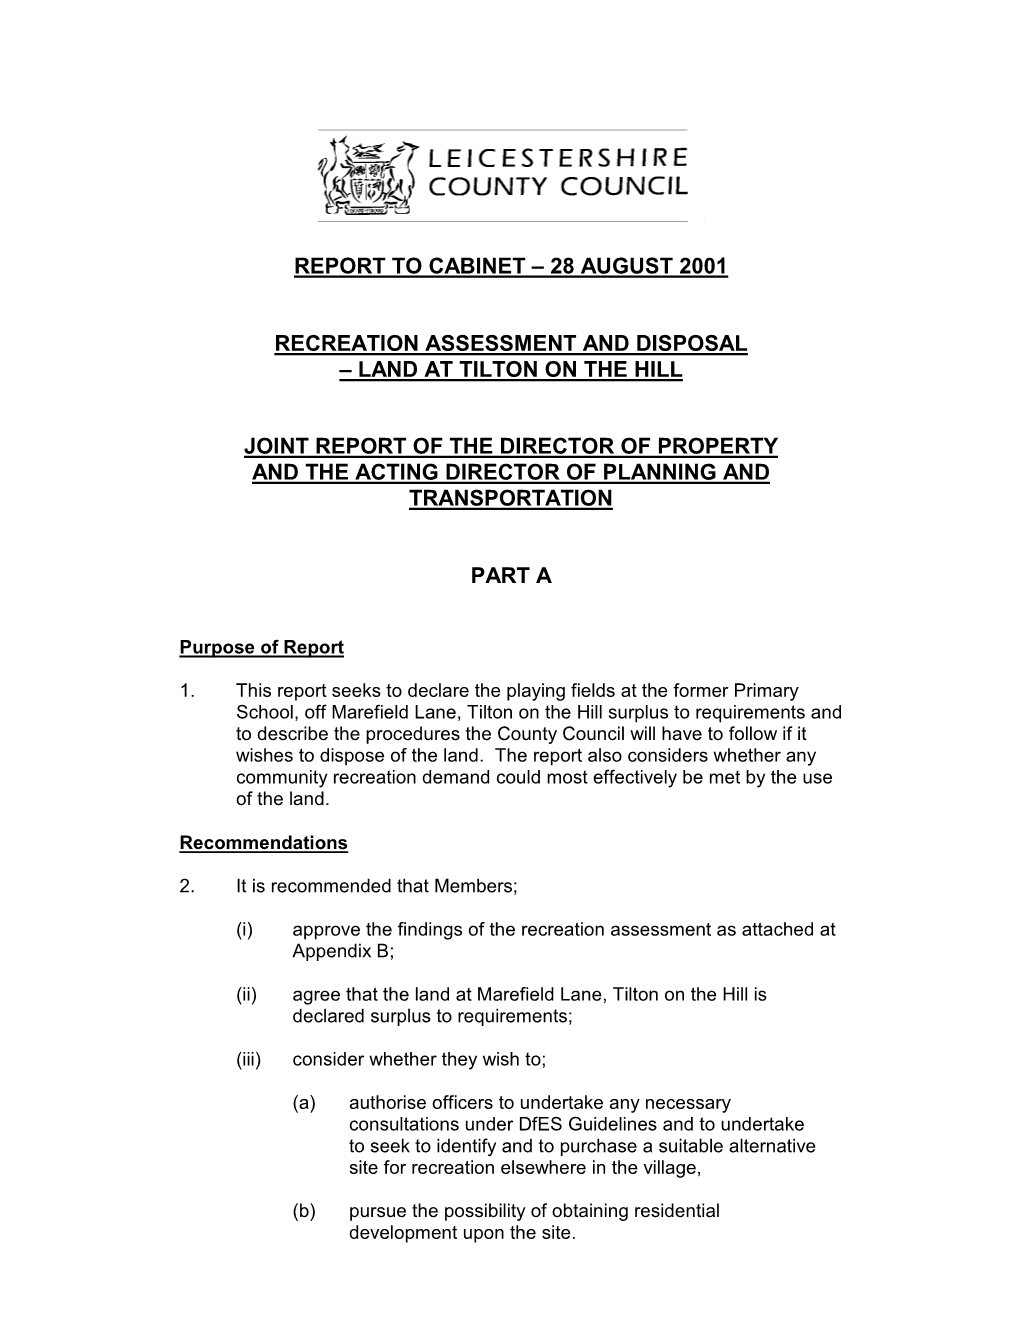 28 August 2001 Recreation Assessment and Disposal